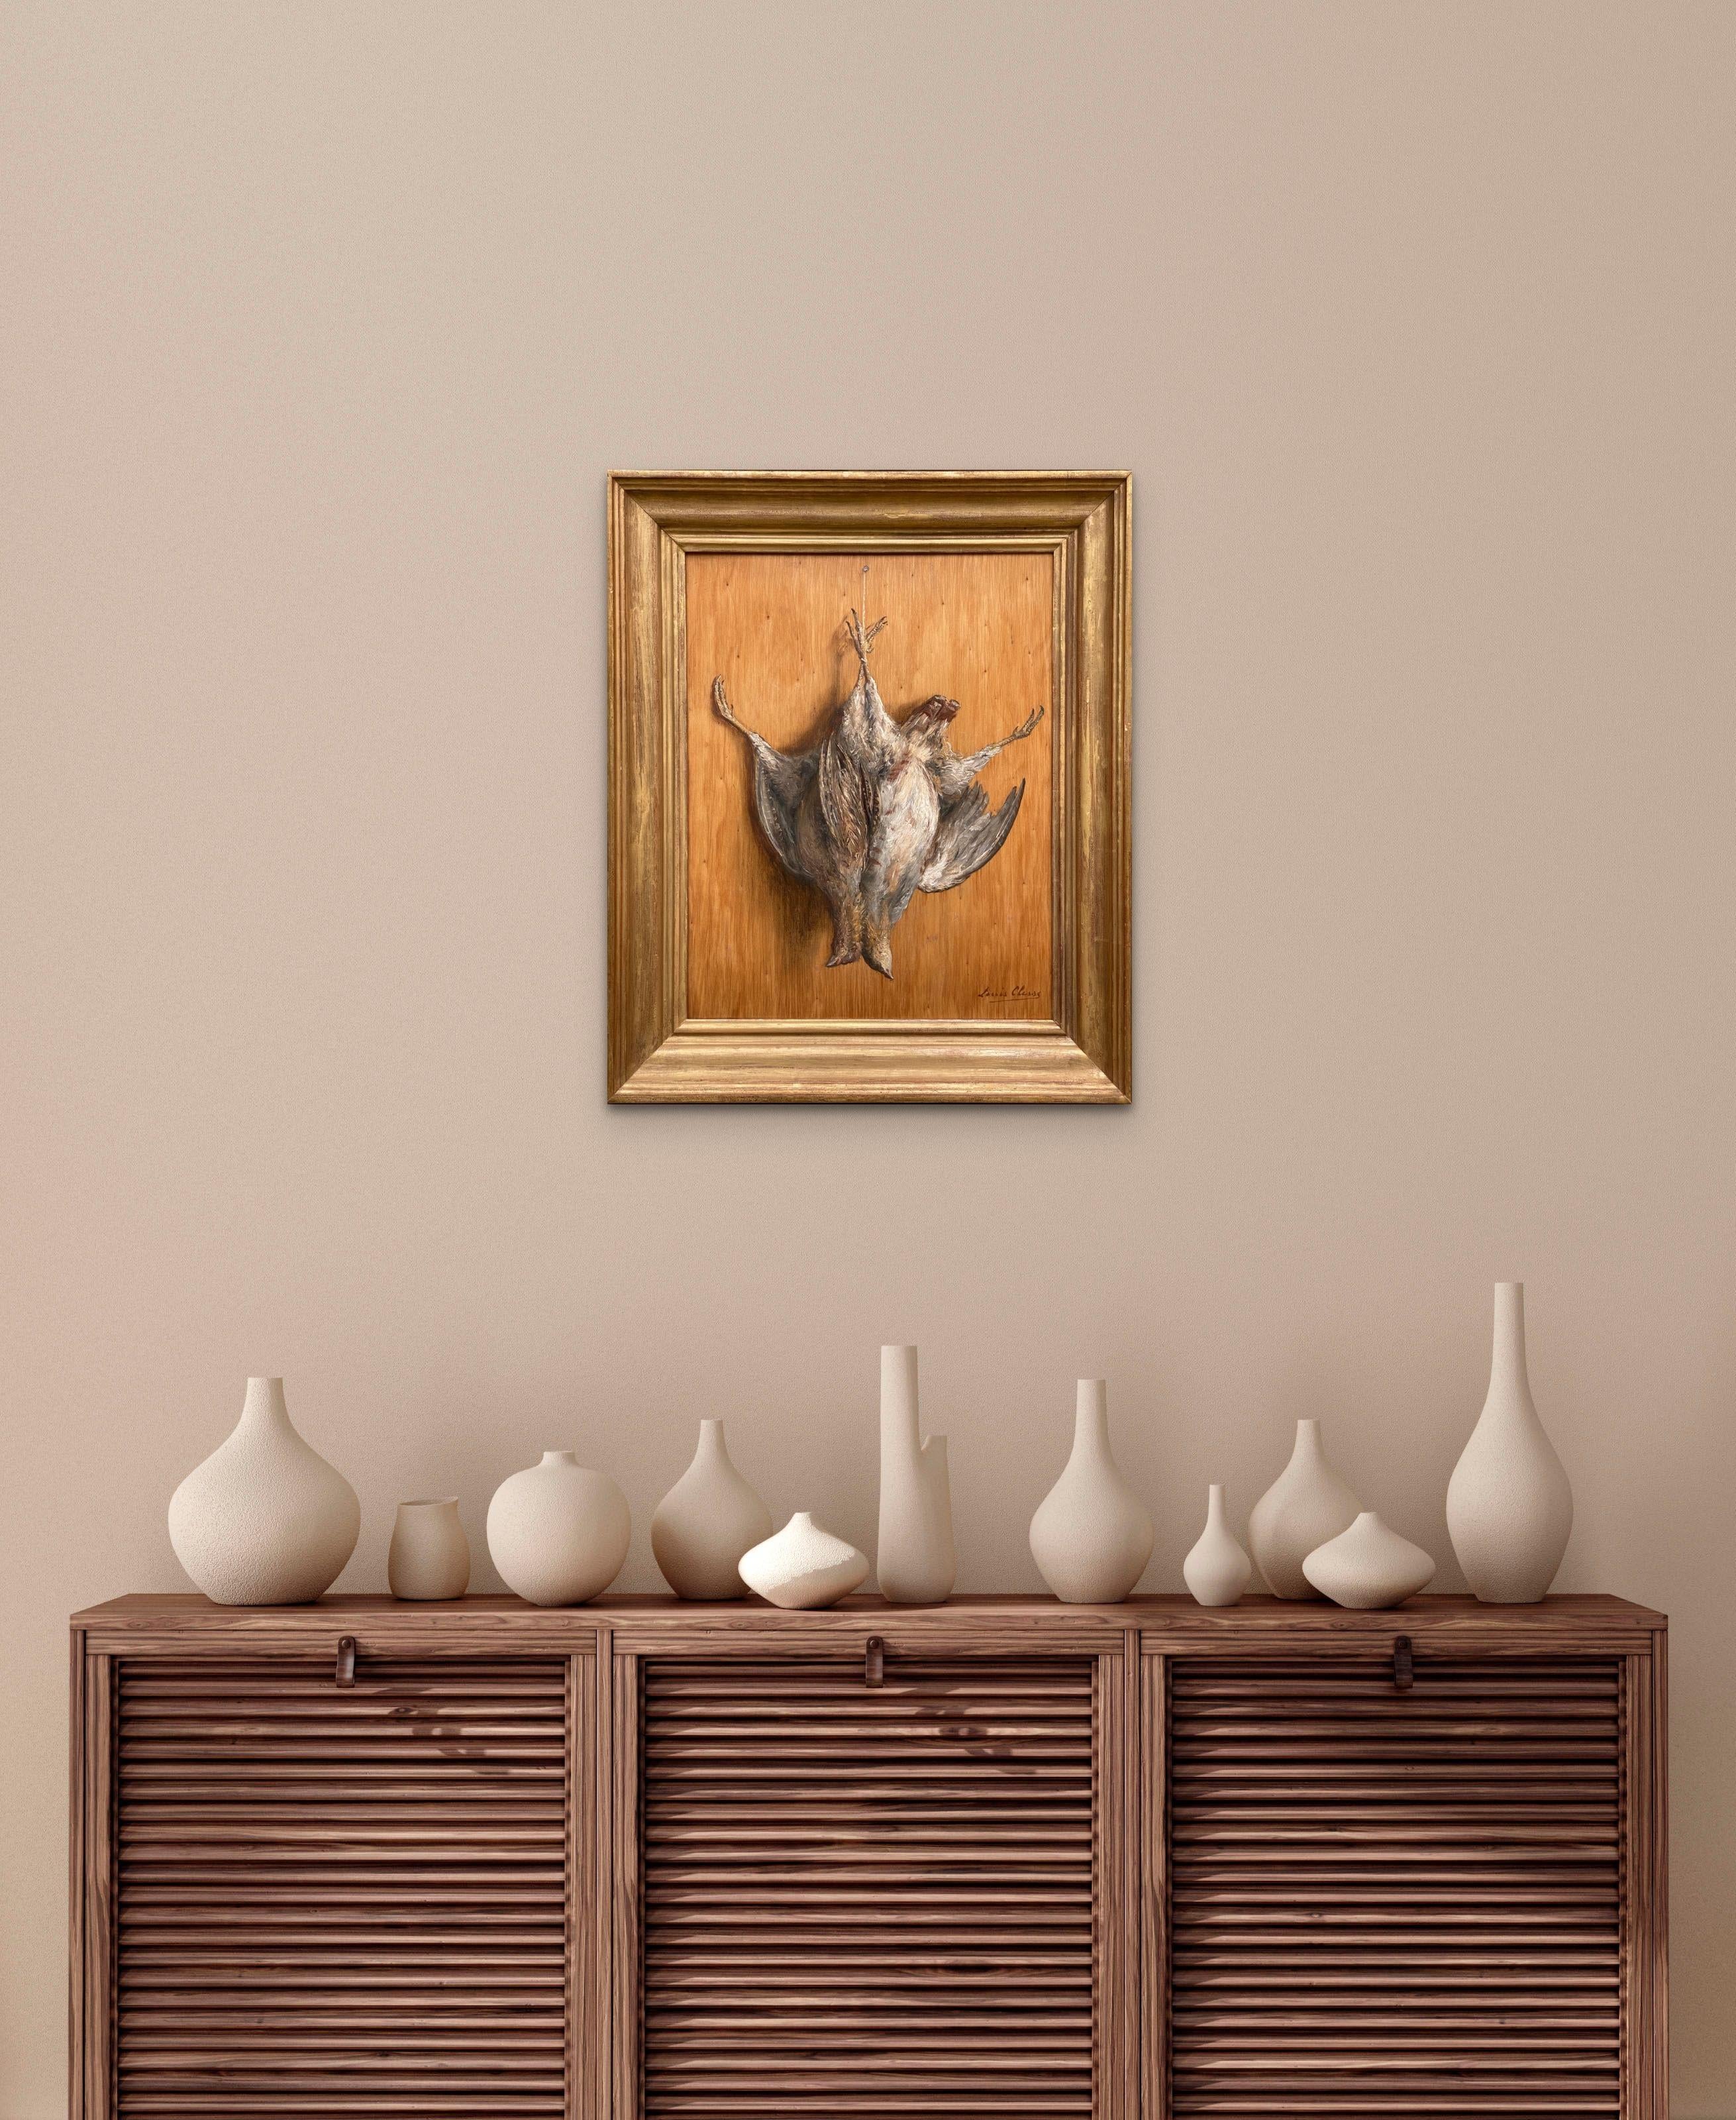 Trompe L’Oeil with a Two Partridges, Louis Clesse, Brussels 1889 – 1961, Belgian For Sale 2